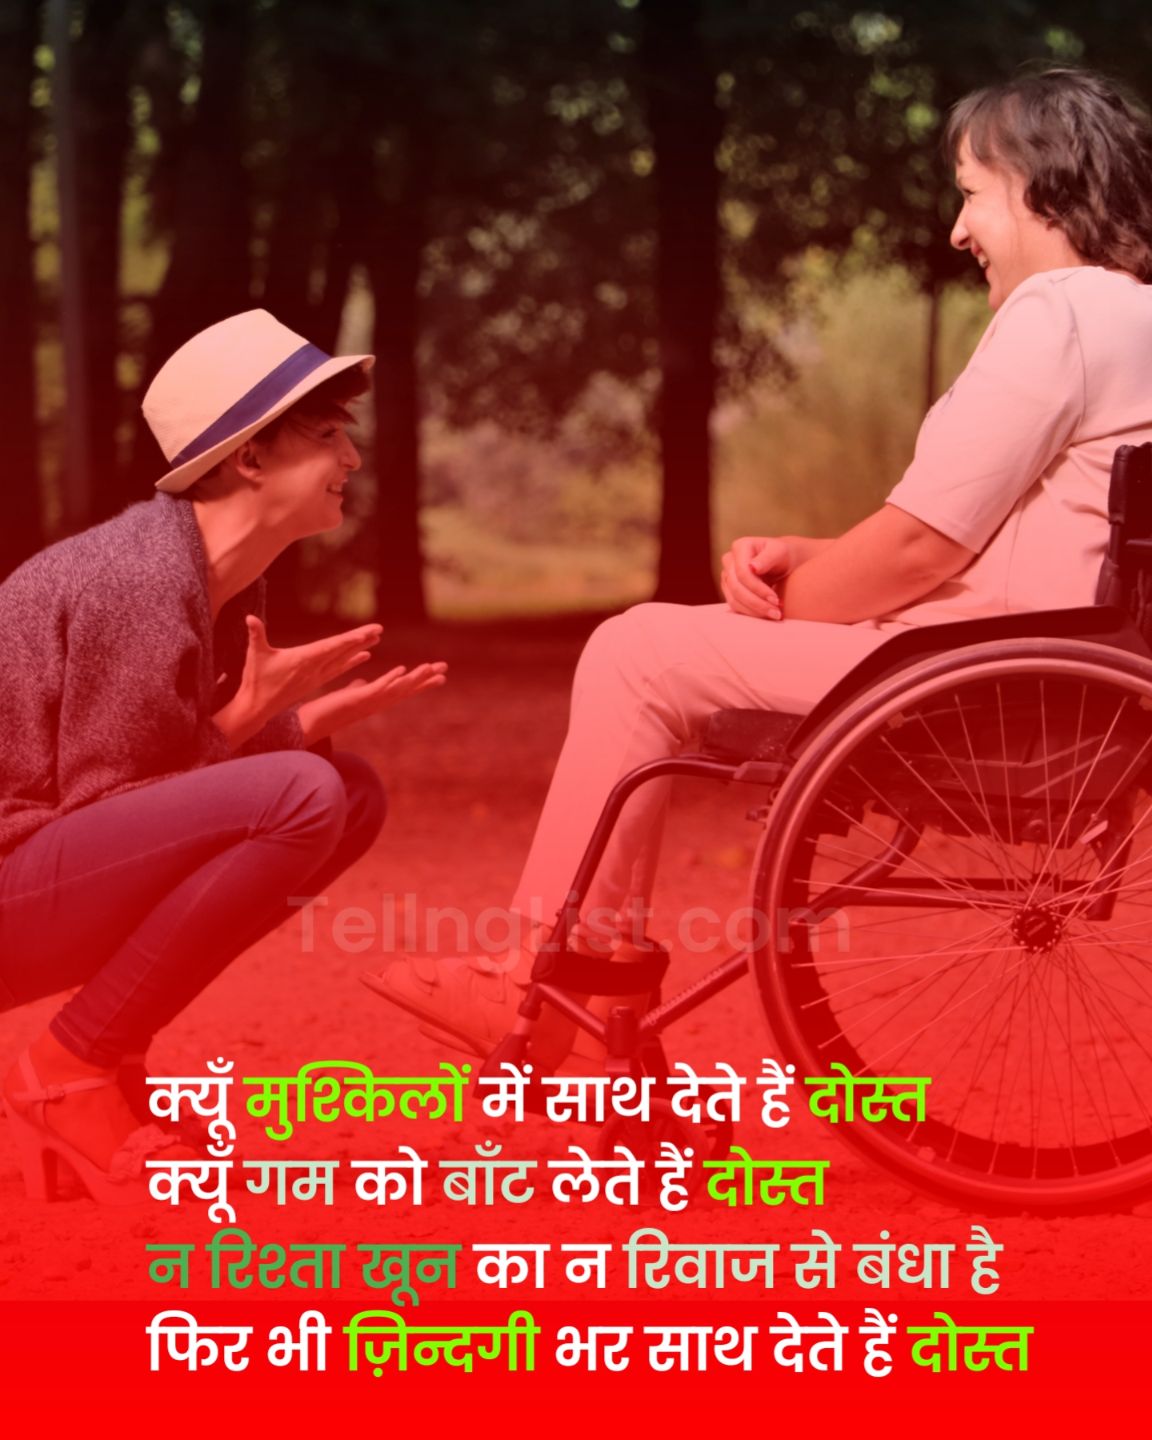 Best Shayari and sms collection : Khoobsurat Dosti SMS in Hindi With Pic | Friendship  Shayari in Hindi With Image